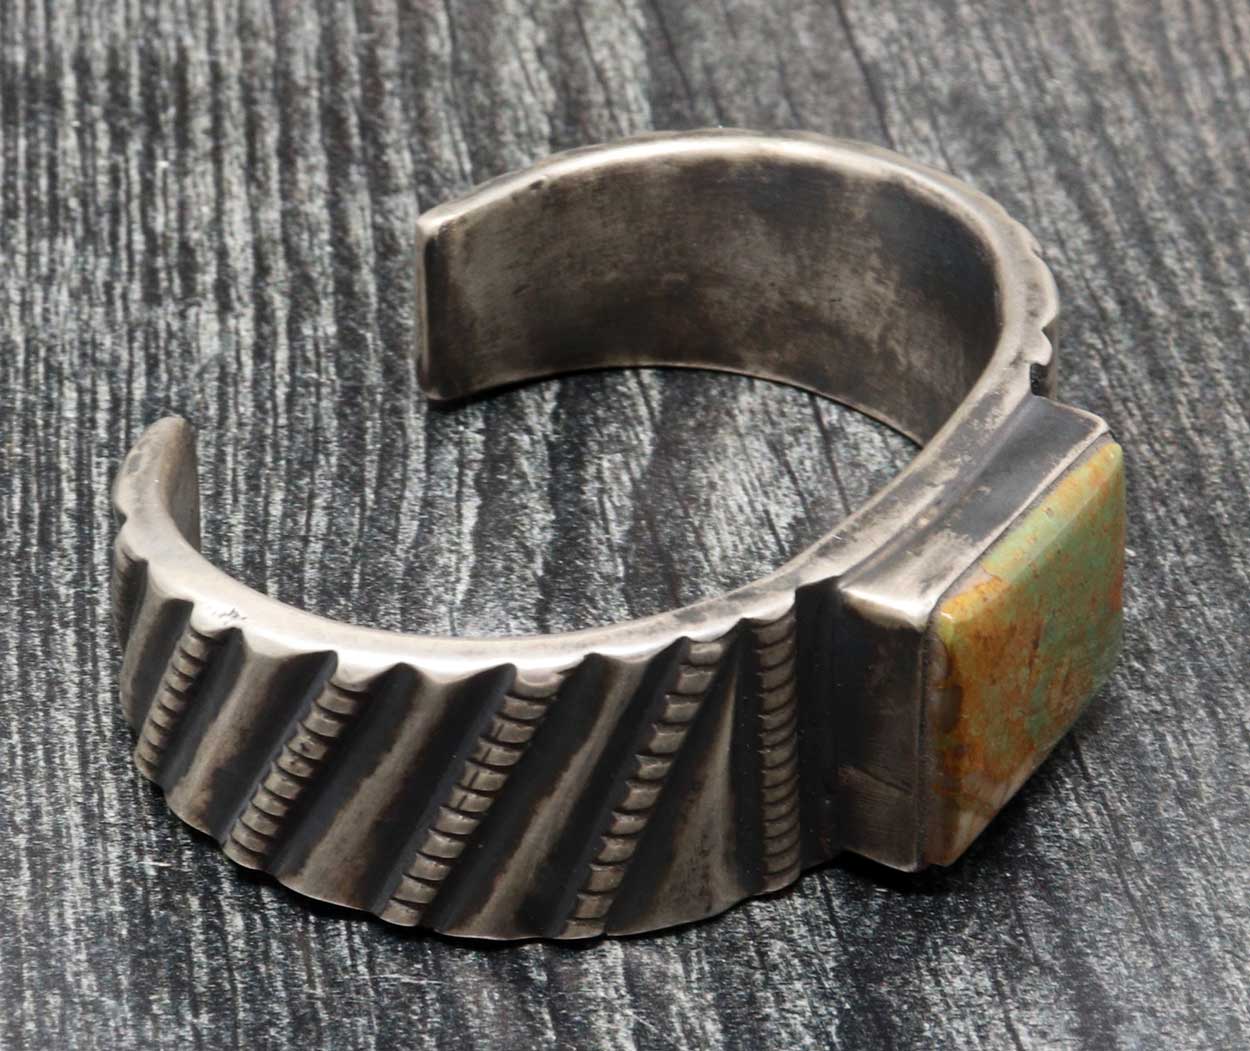 Handcrafted Ingot Bracelet by Mike French